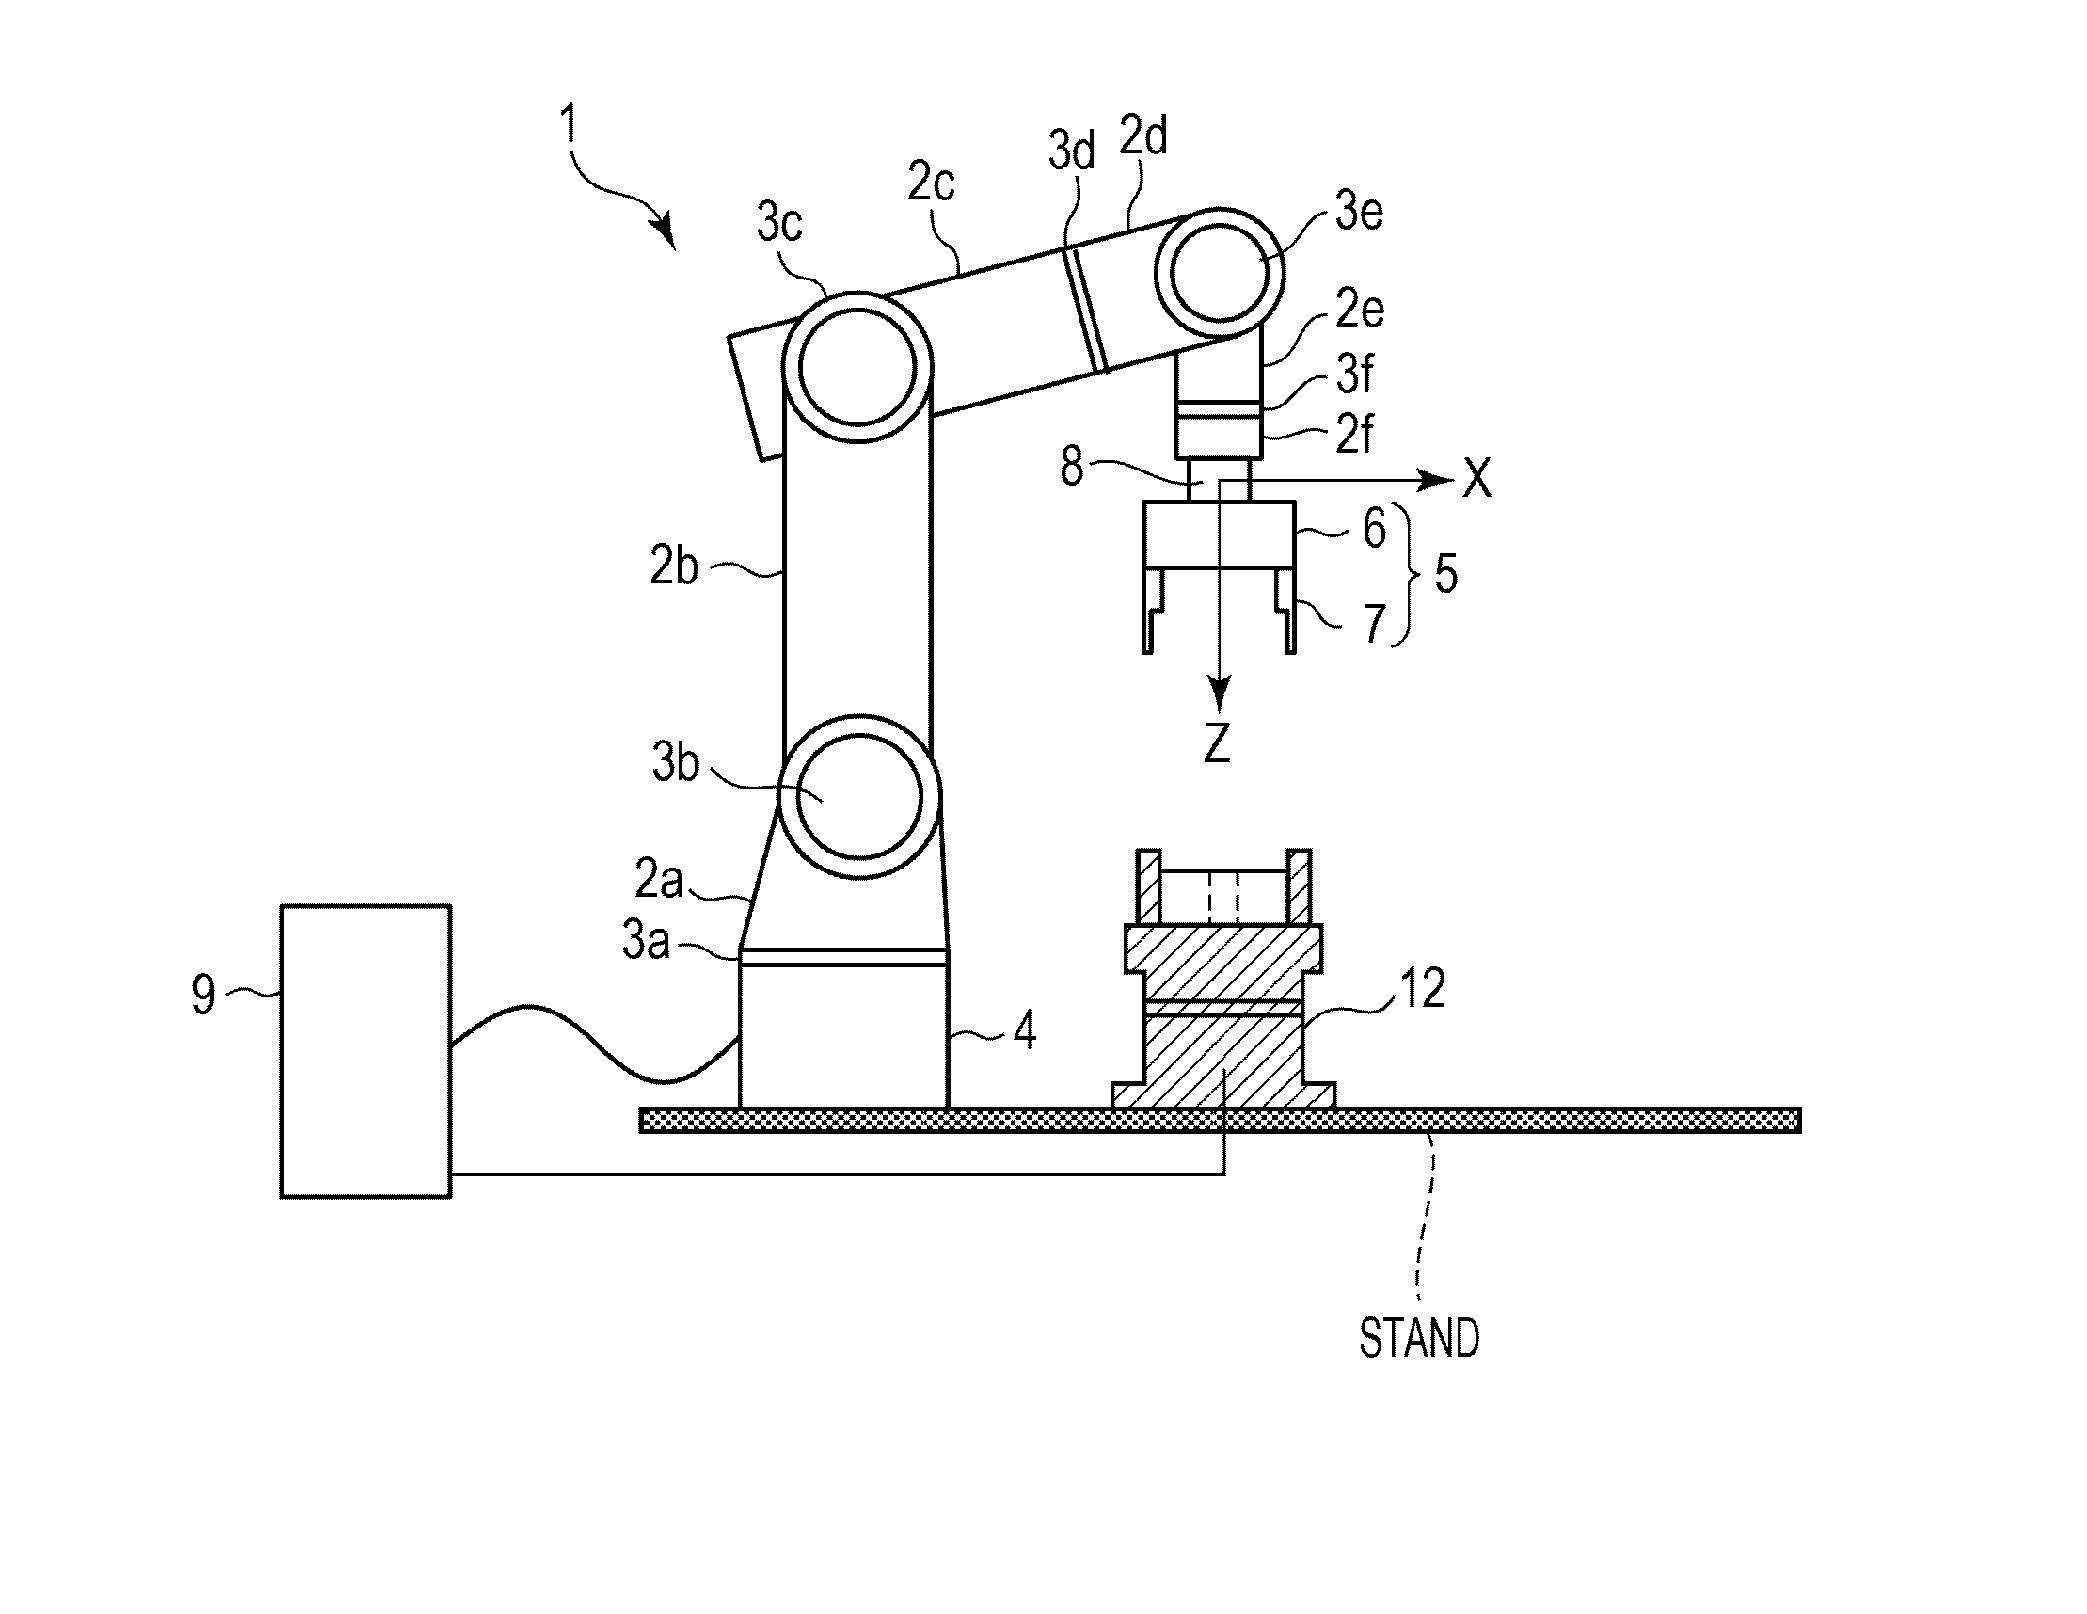 Automated assembly apparatus and method of assembling components by using automated assembly apparatus